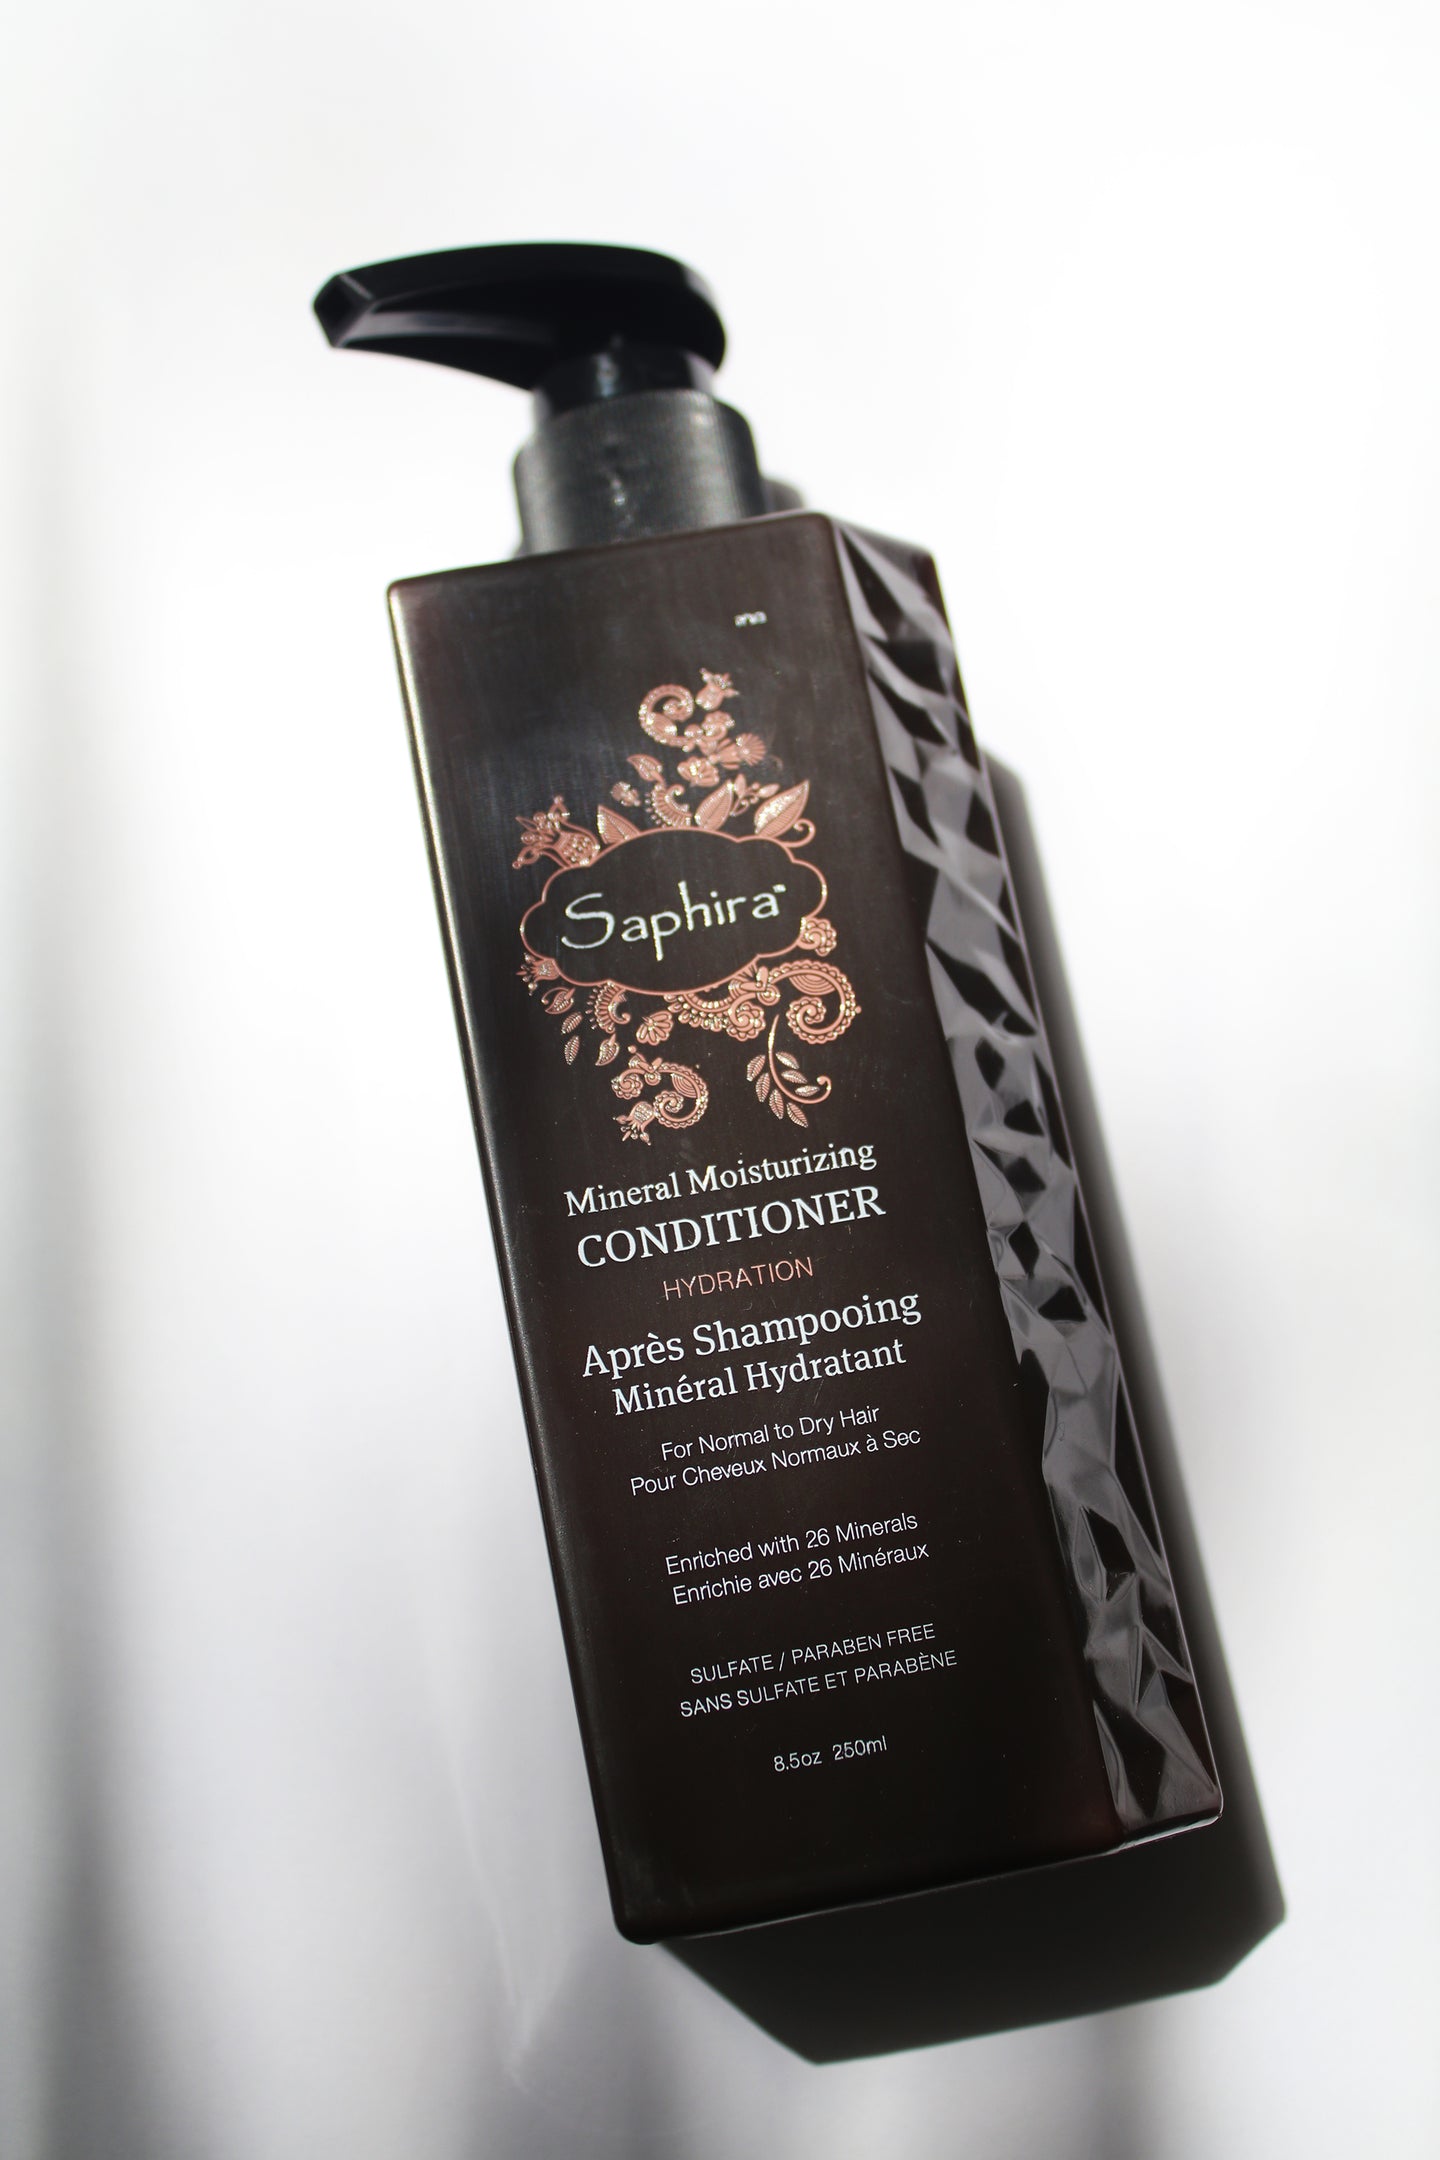 a bottle of mineral moisturizing conditioner by Saphira - the bottle has a pump lid